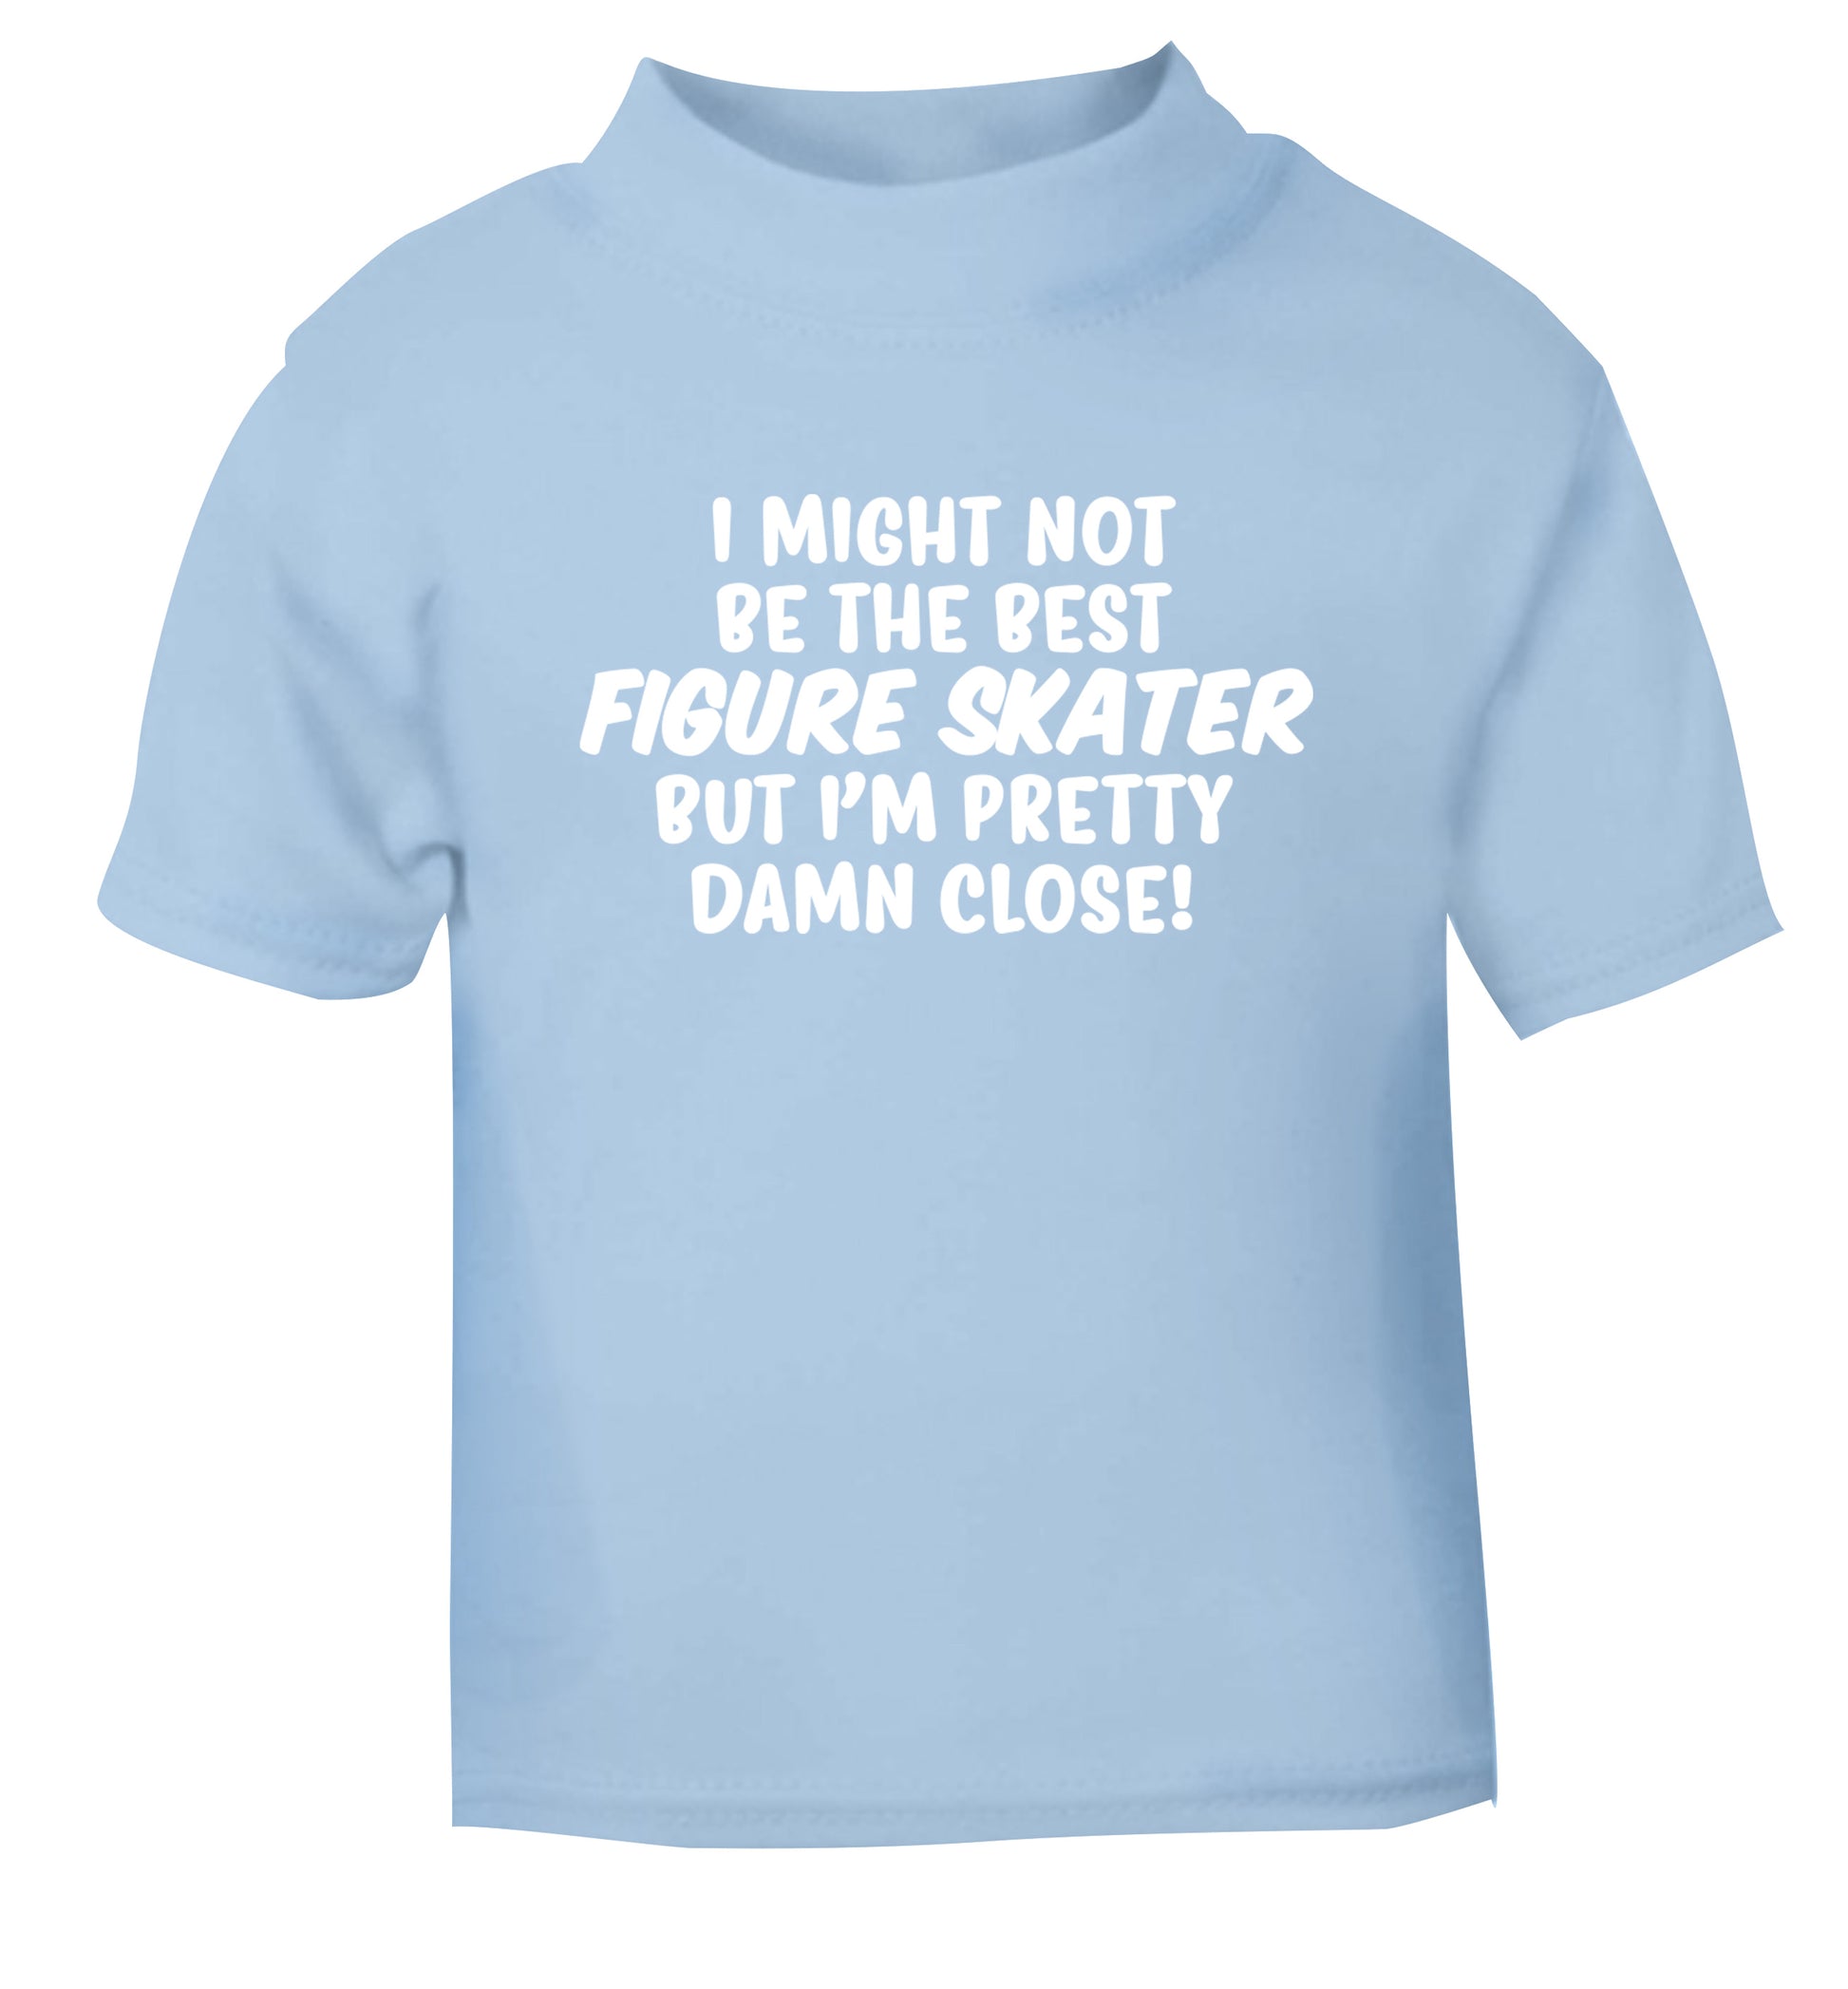 I might not be the best figure skater but I'm pretty damn close! light blue Baby Toddler Tshirt 2 Years